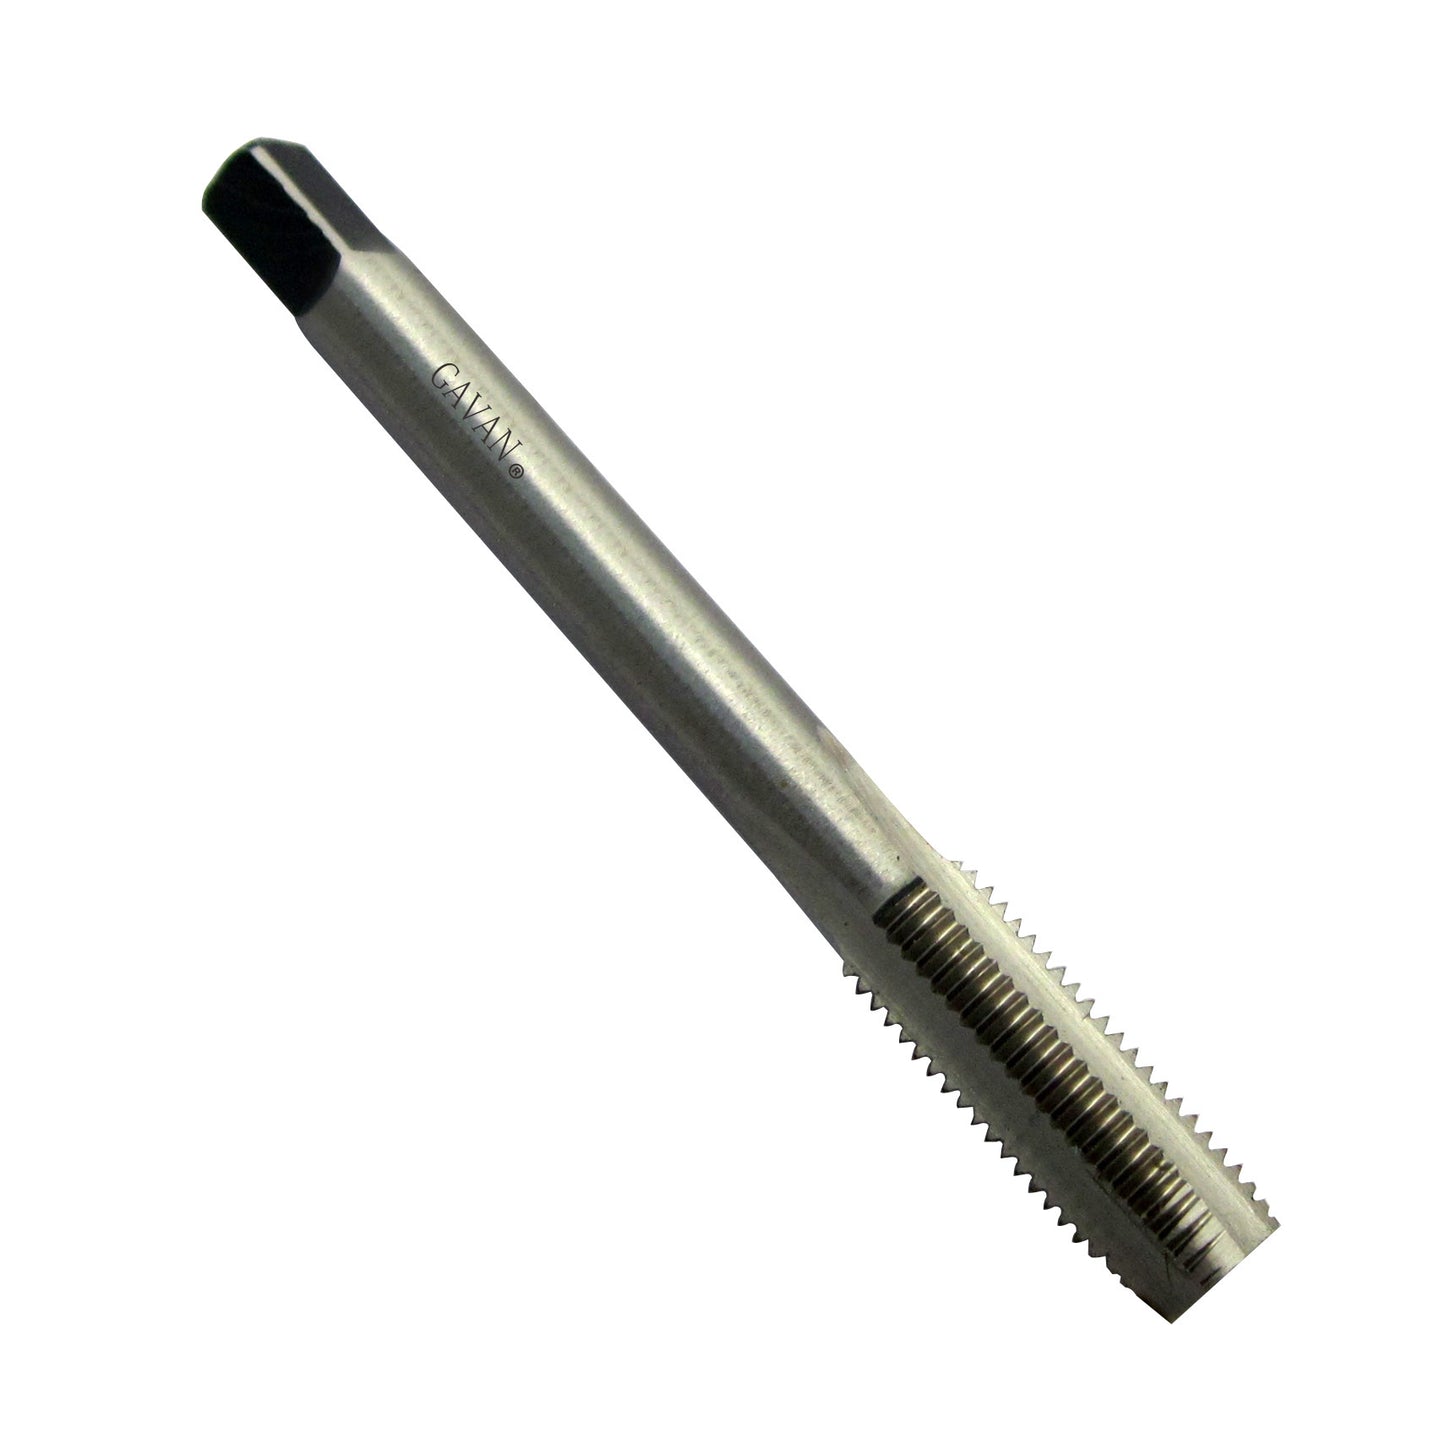 9/32" - 40 HSS Unified Right Hand Thread Tap